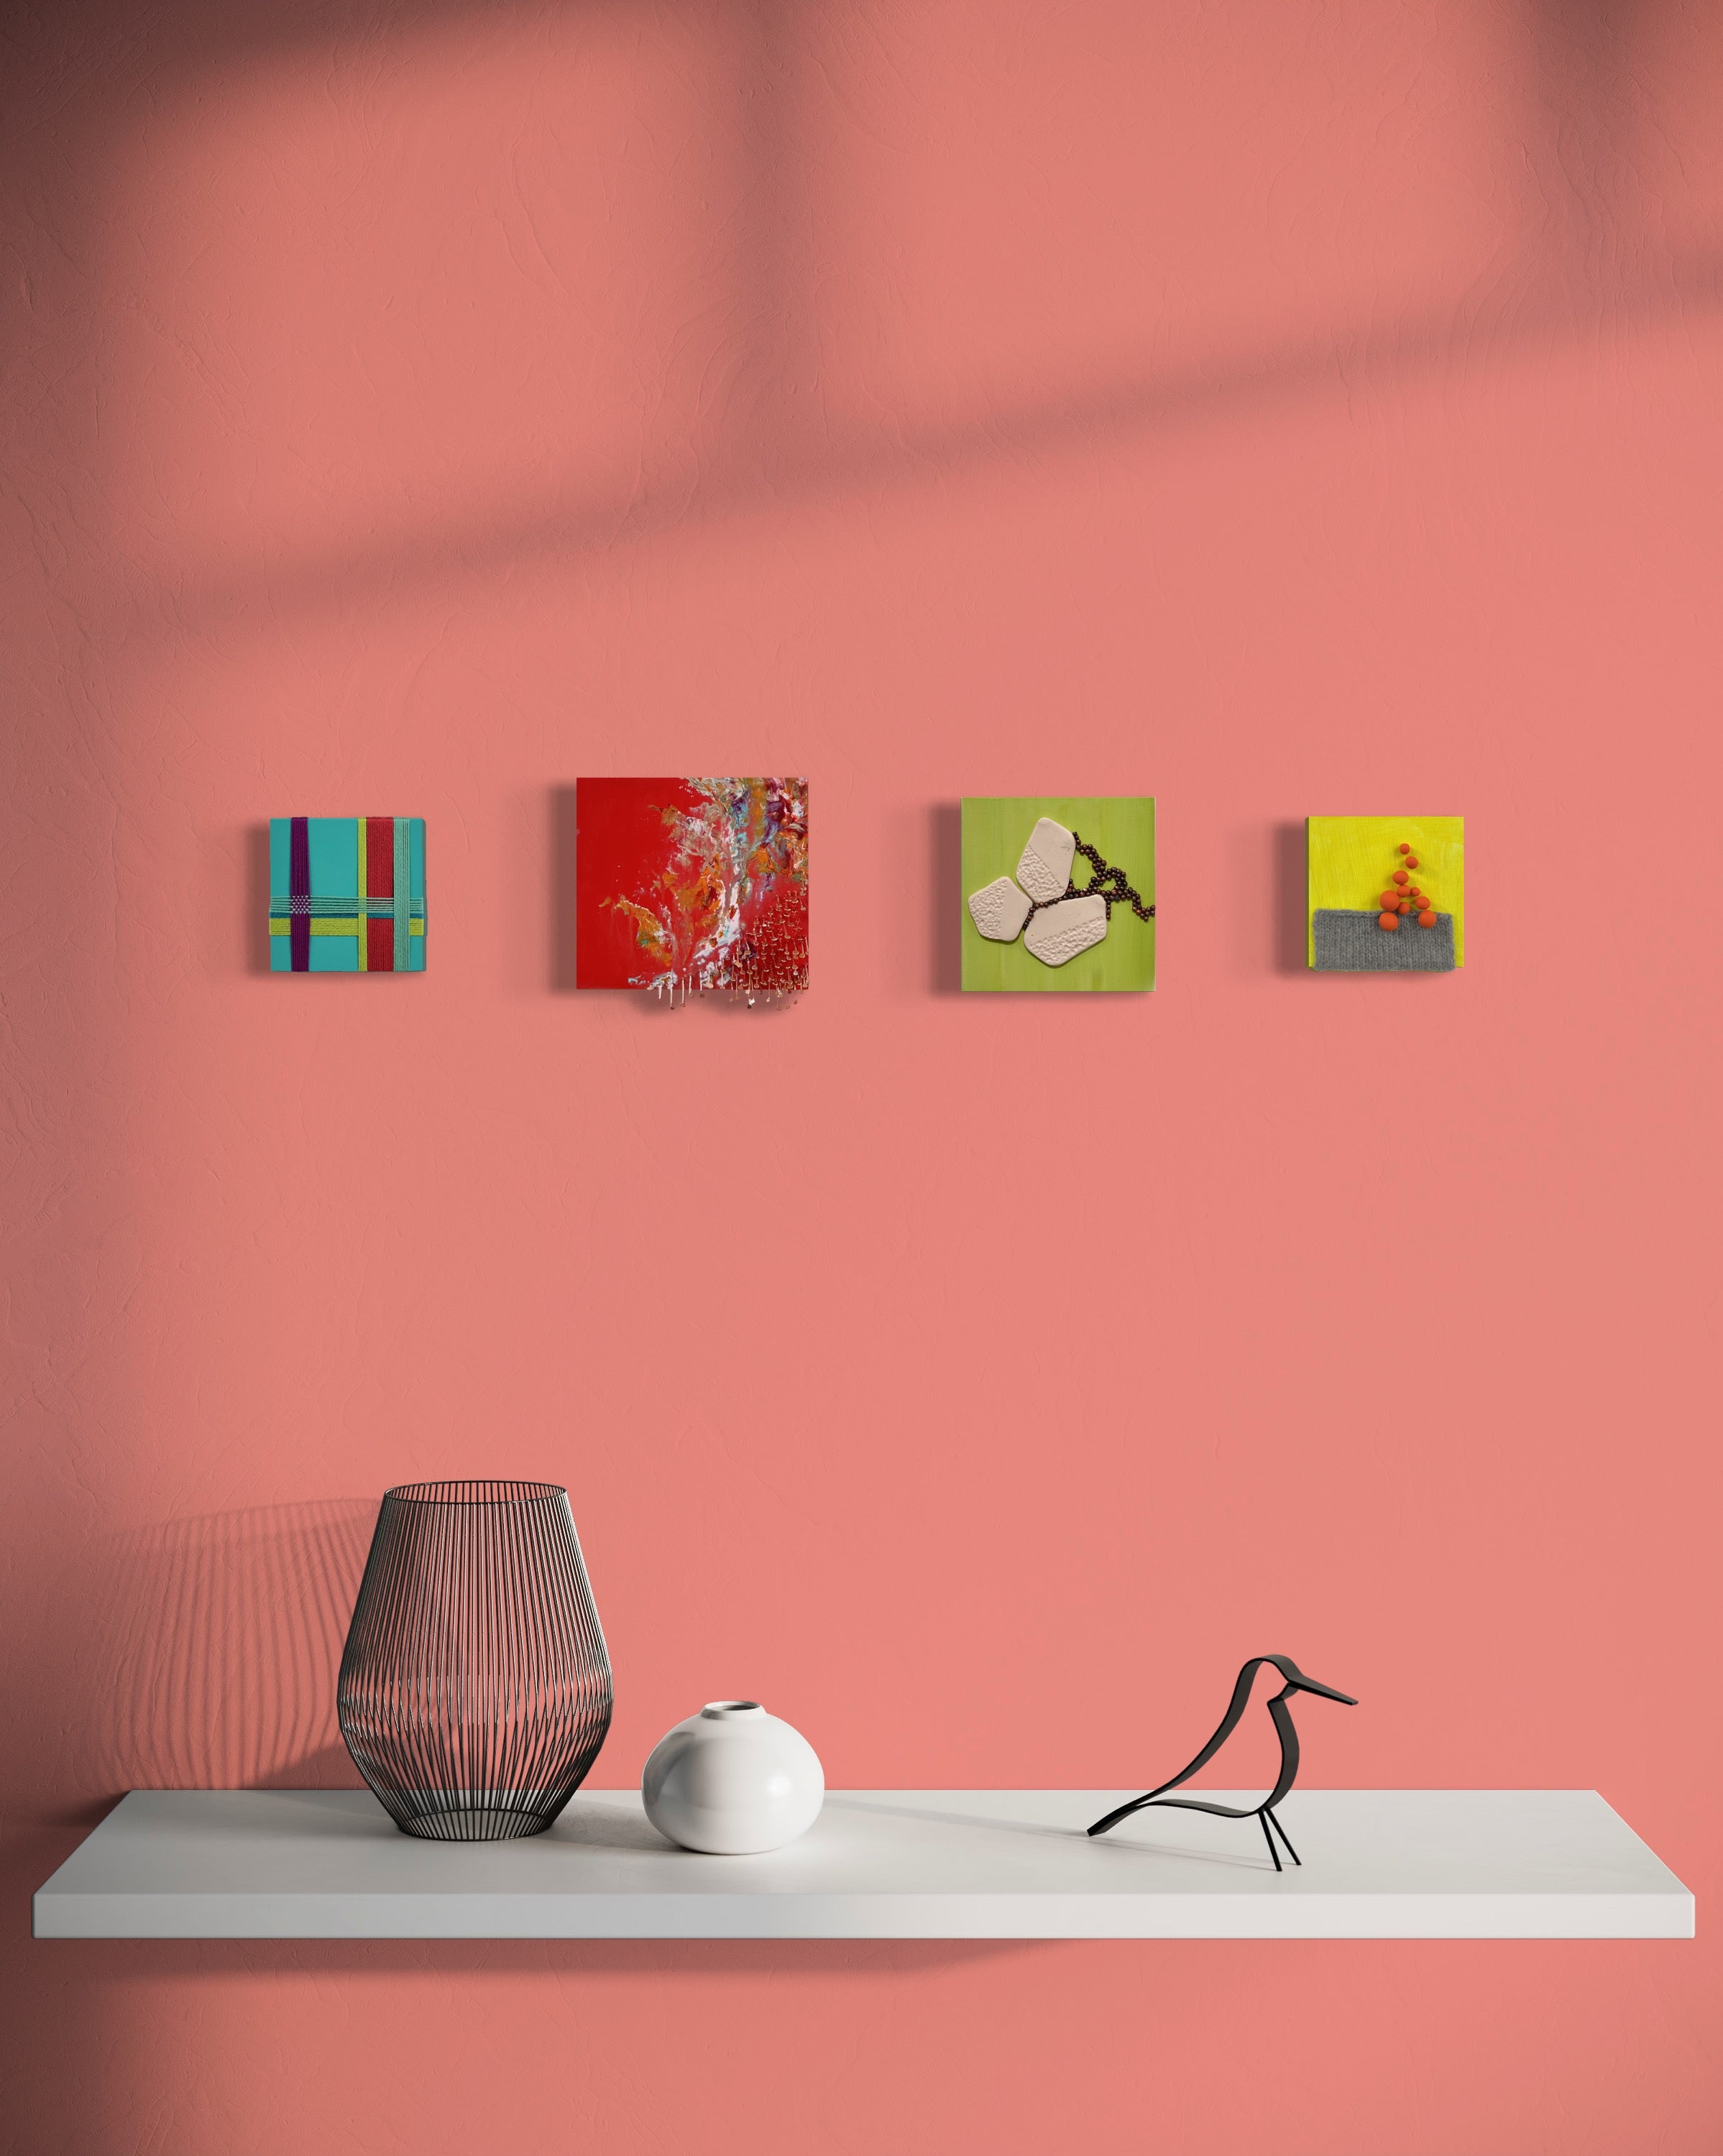 Four artworks displayed in a horizontal row on a pink wall above a shelf